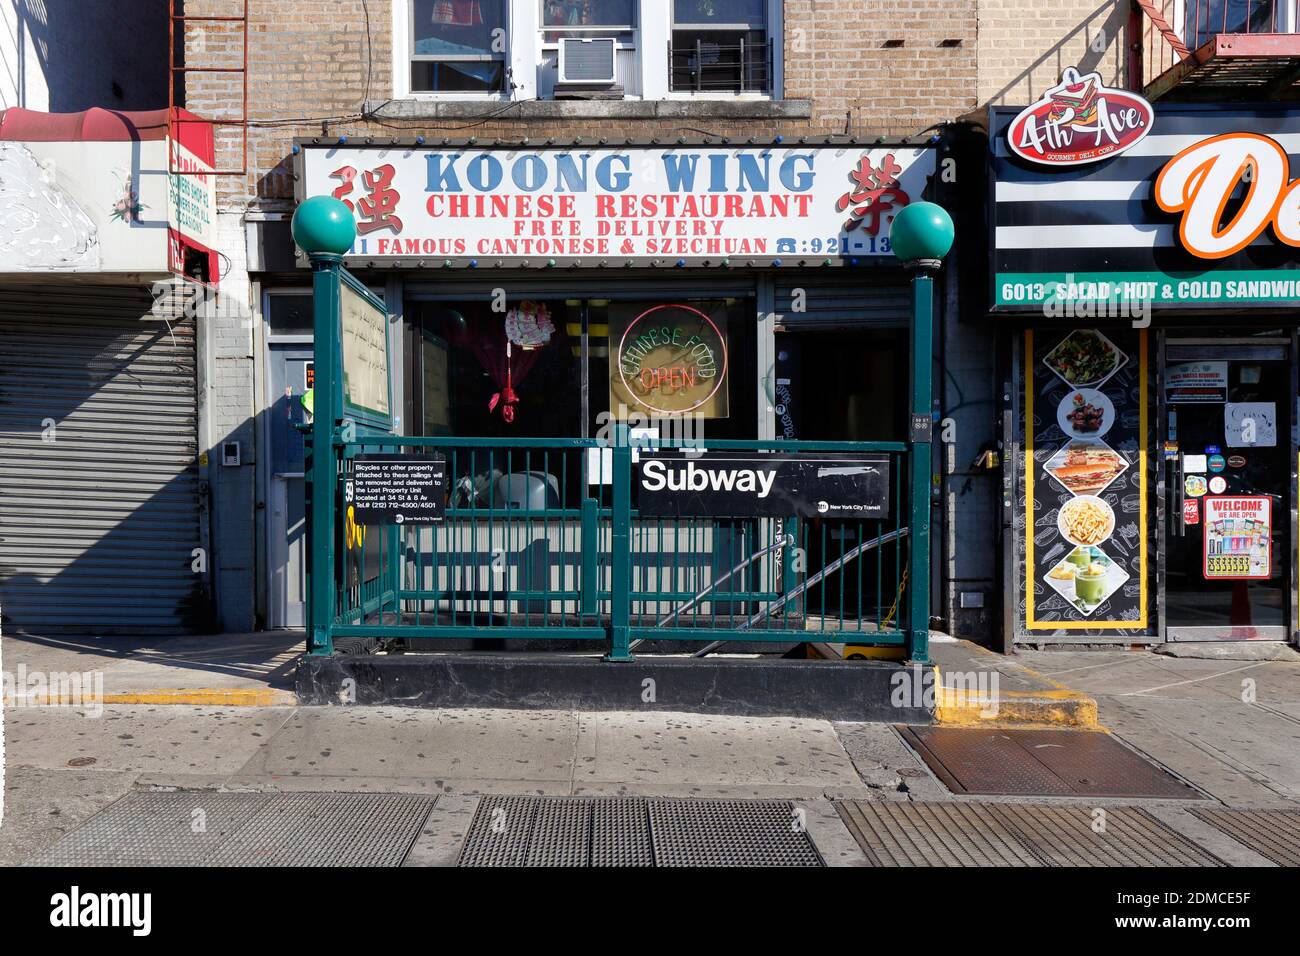 Koong Wing, 6011 4th Ave, Brooklyn, New York. NYC storefront photo of a Chinese Cantonese takeout restaurant in the Sunset Park neighborhood. Stock Photo